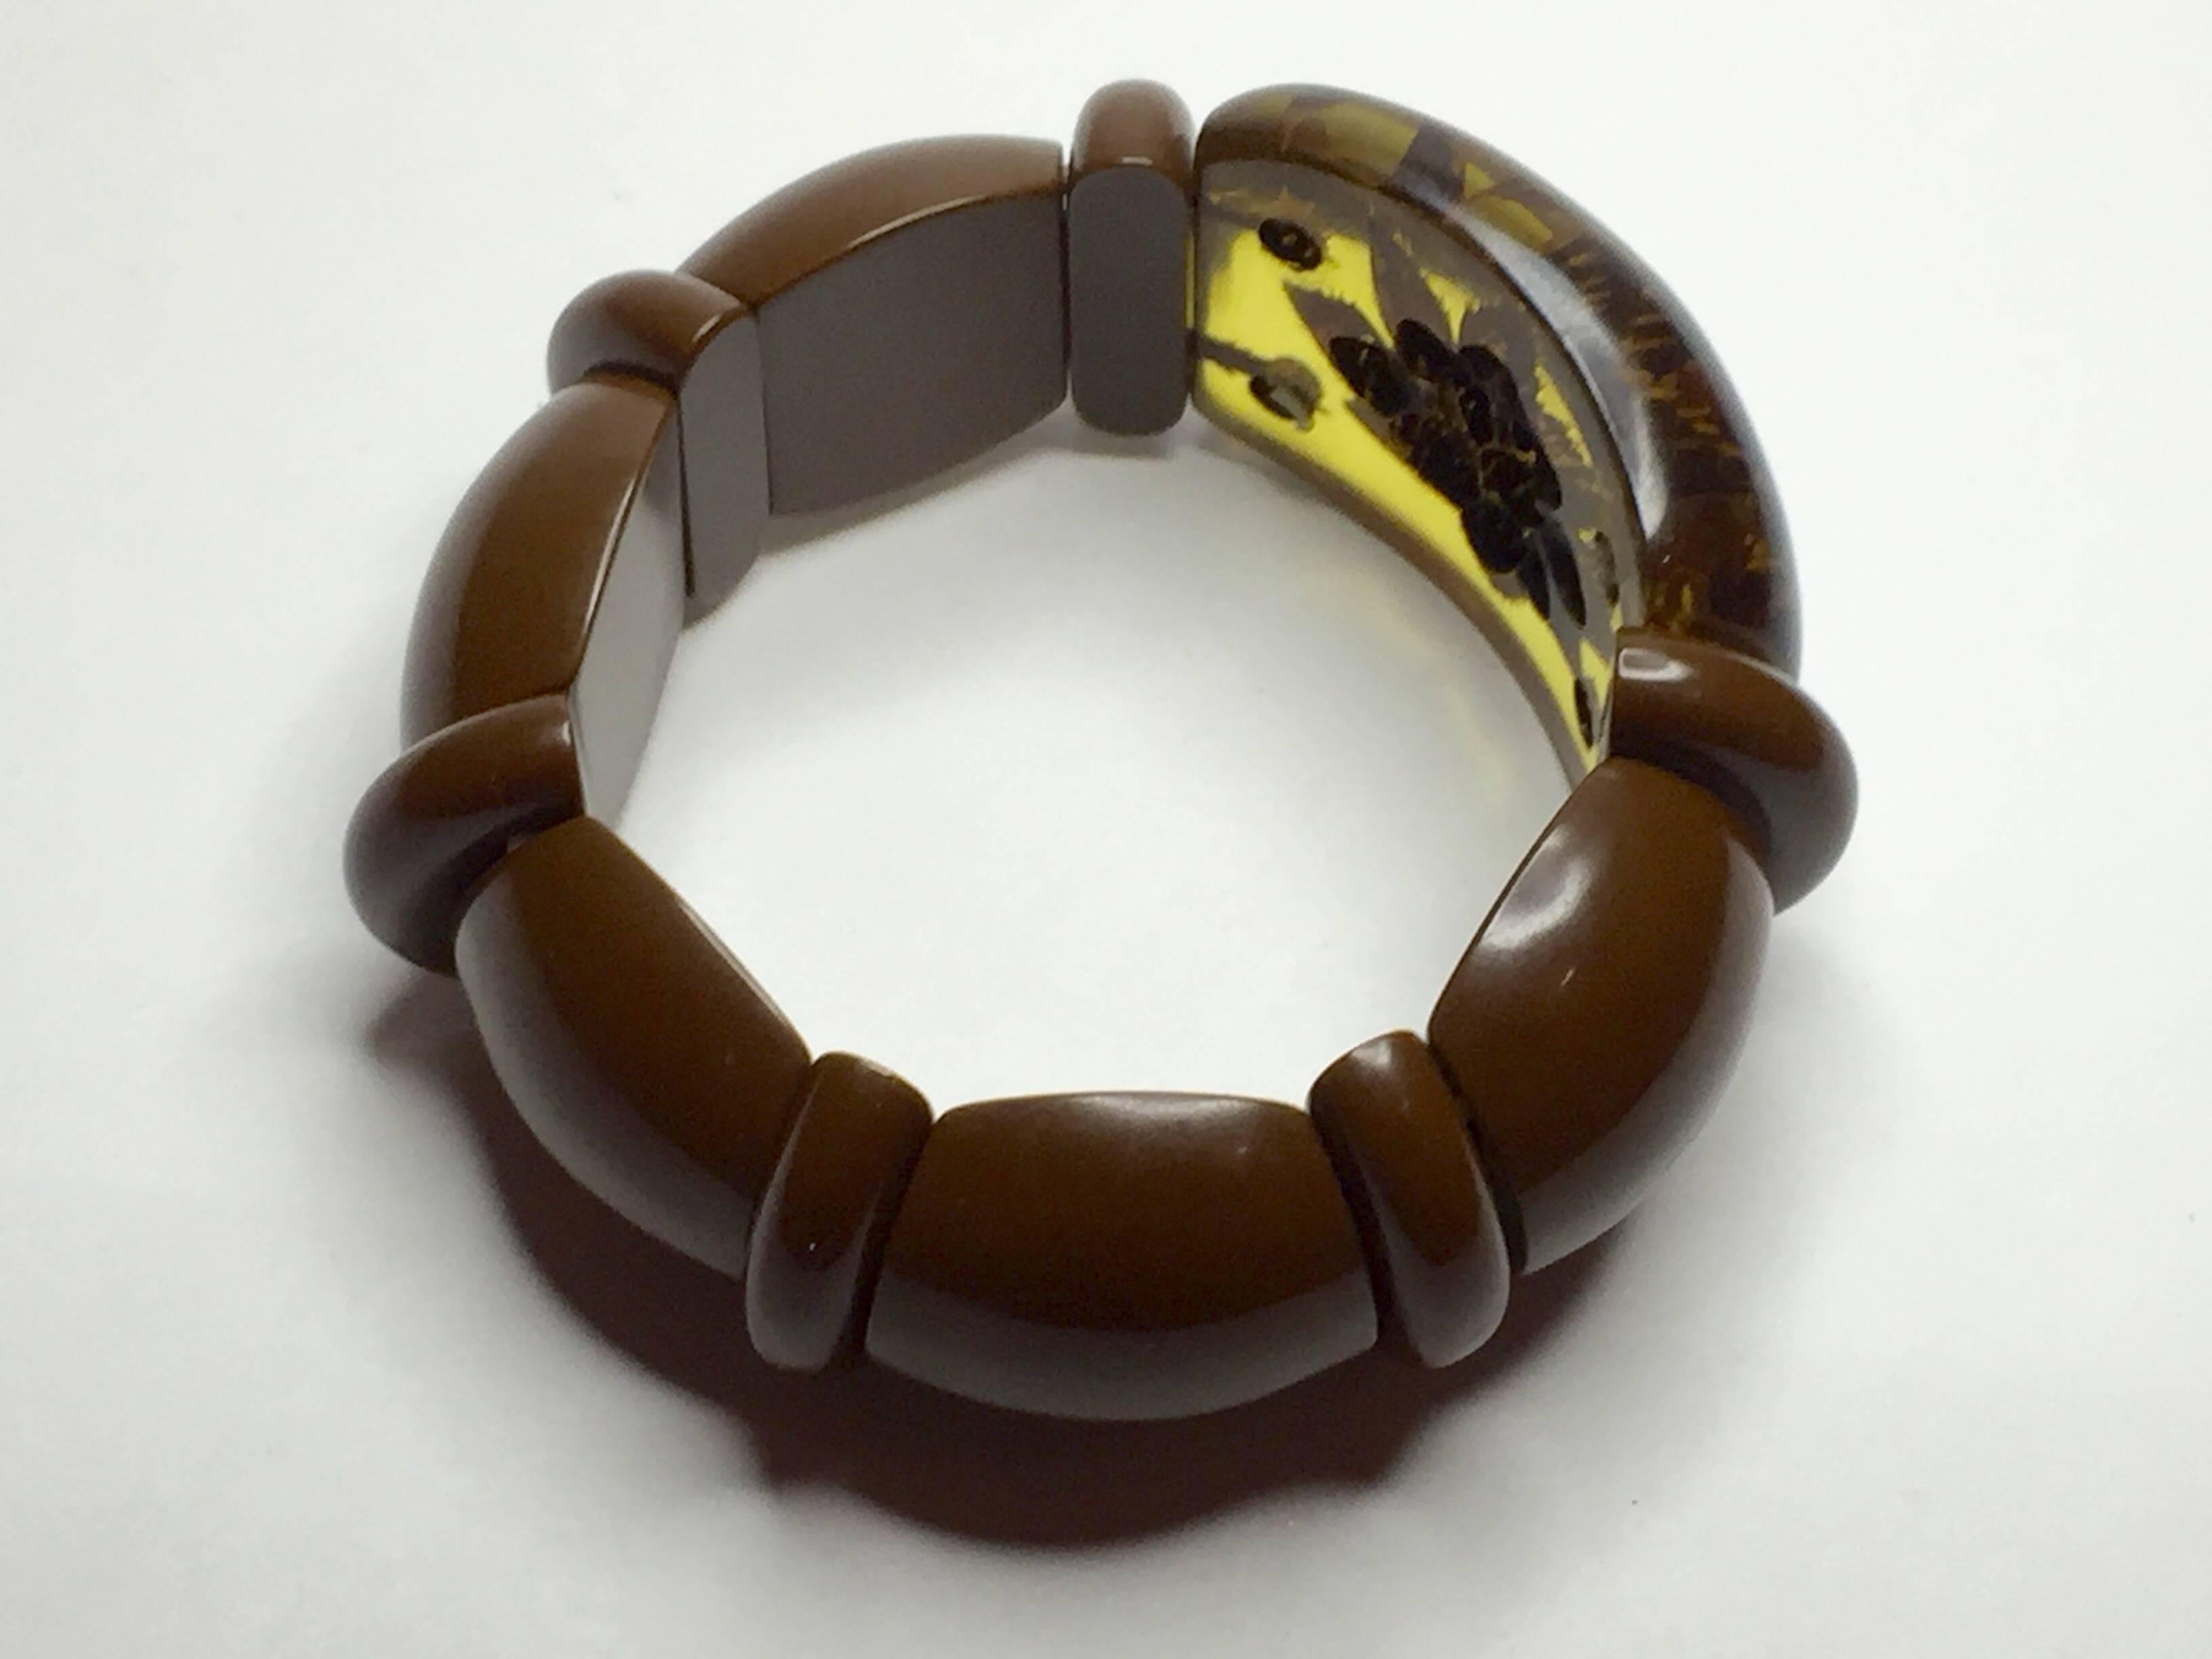 This classic Bakelite stretch bracelet in rich brown and apple juice bakelite with a mysterious and elegant reverse carved floral brown detail is a pillar of the world of collecting and wearing Fine Bakelite jewelry. Flat backed brown bakelite